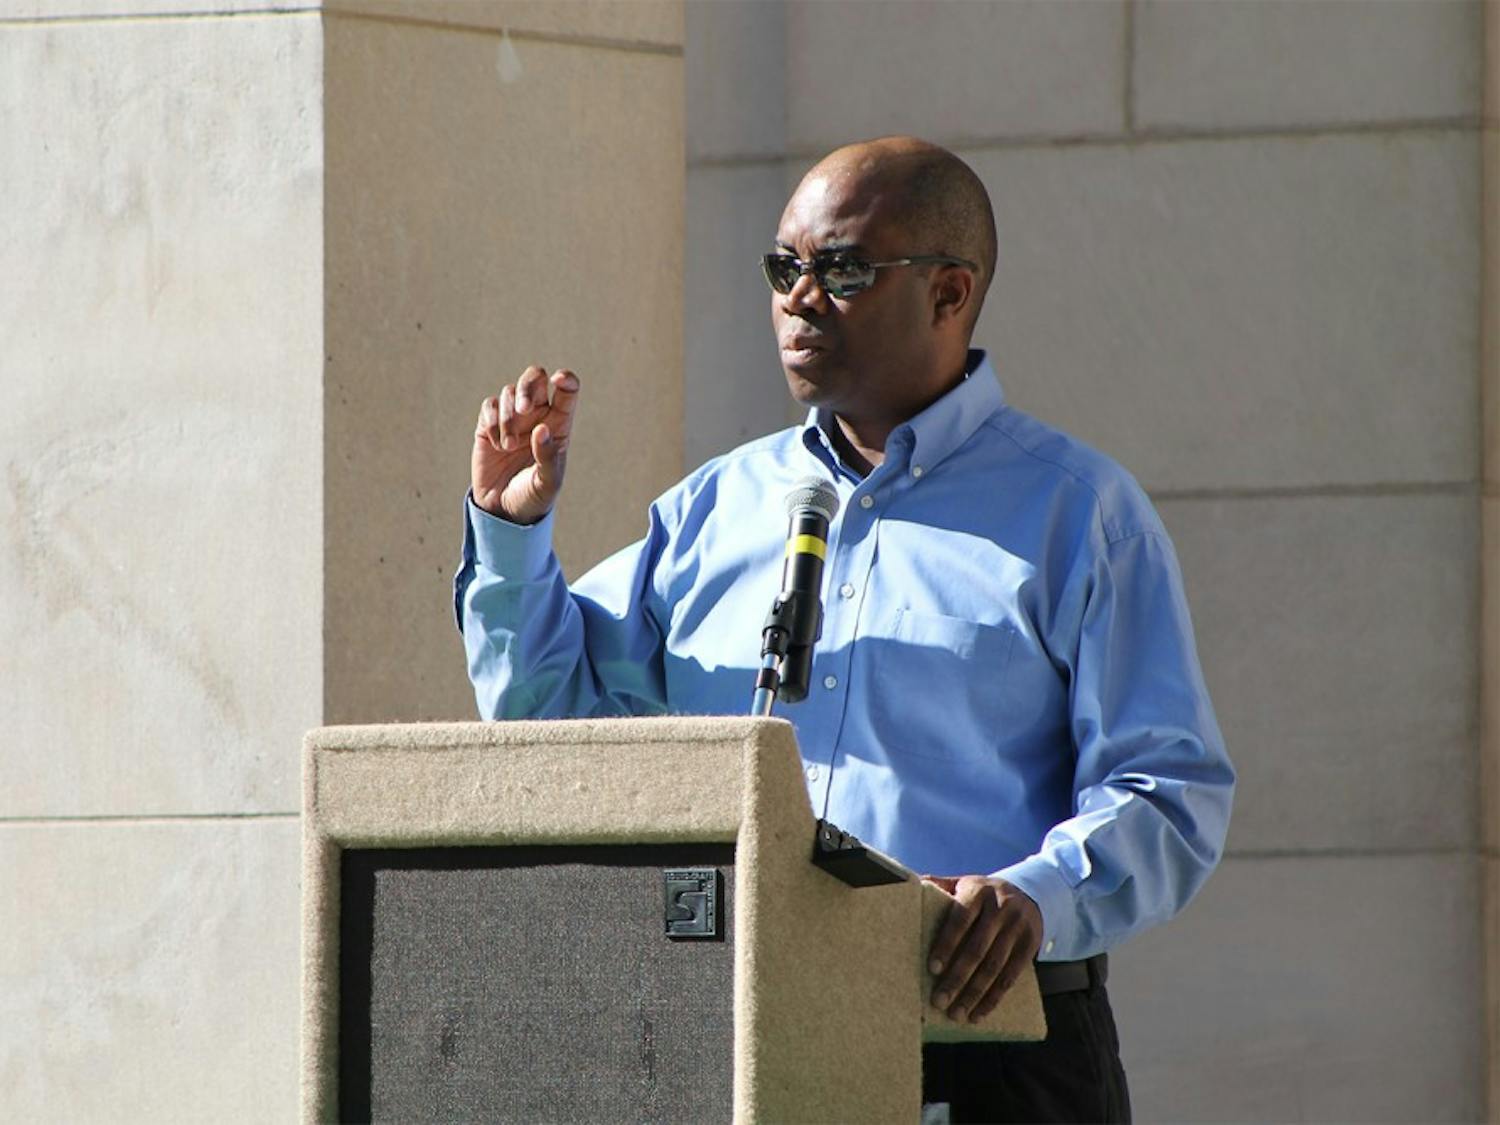 William Thorpe, son of Bill Thorpe spoke at the Celebration of Our Peace and Justice Legacy in front of the Post Office-Courthouse on Oct. 11, 2015.